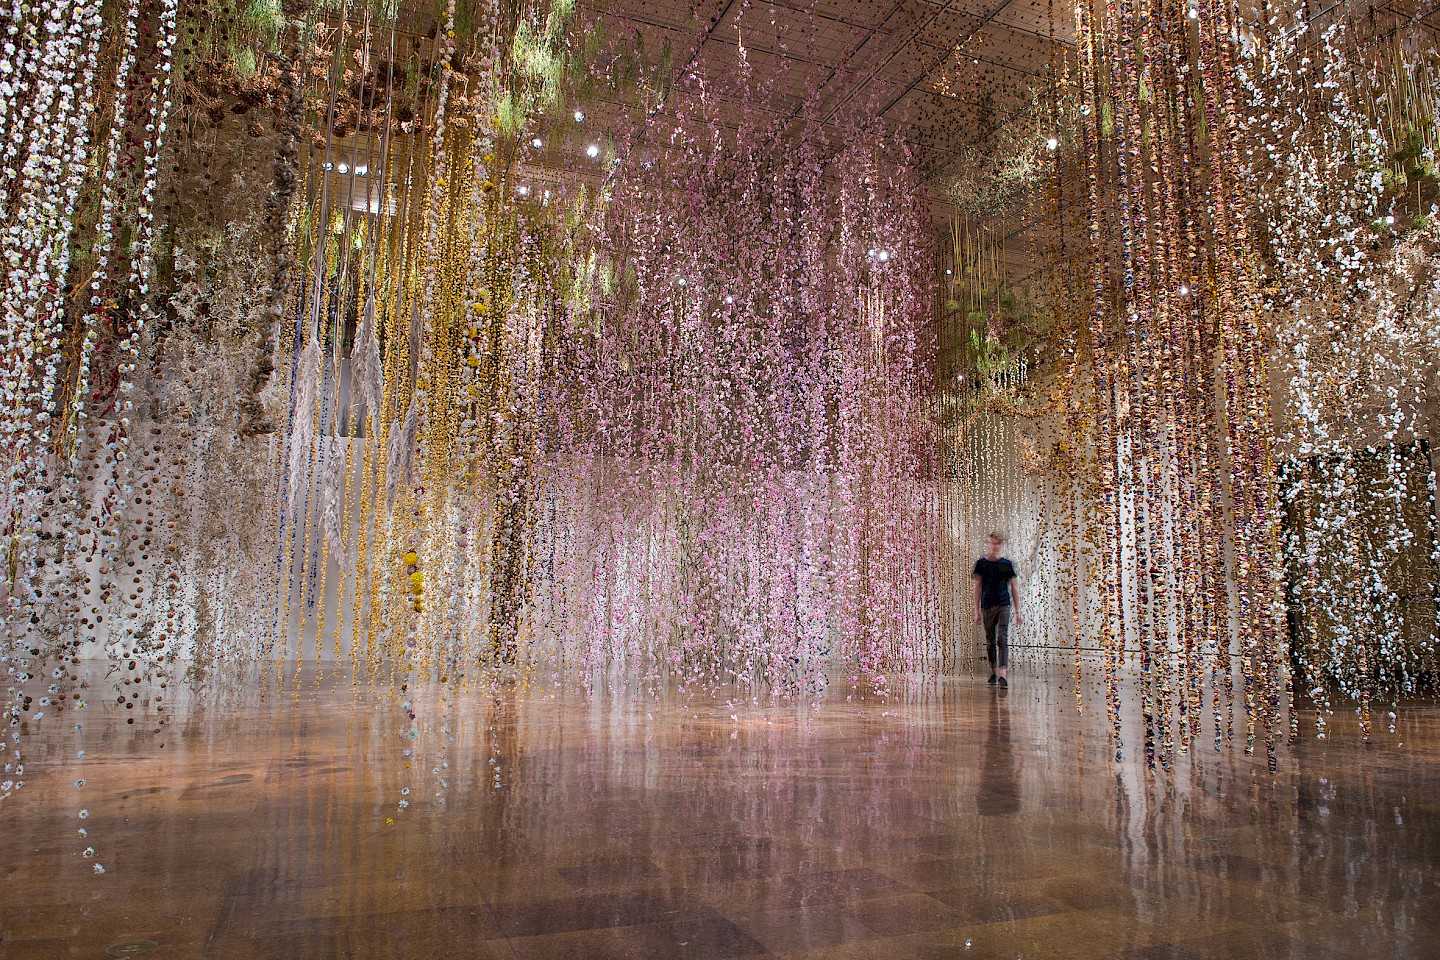 Installation by artist Rebecca Louise Law made from dried flowers.